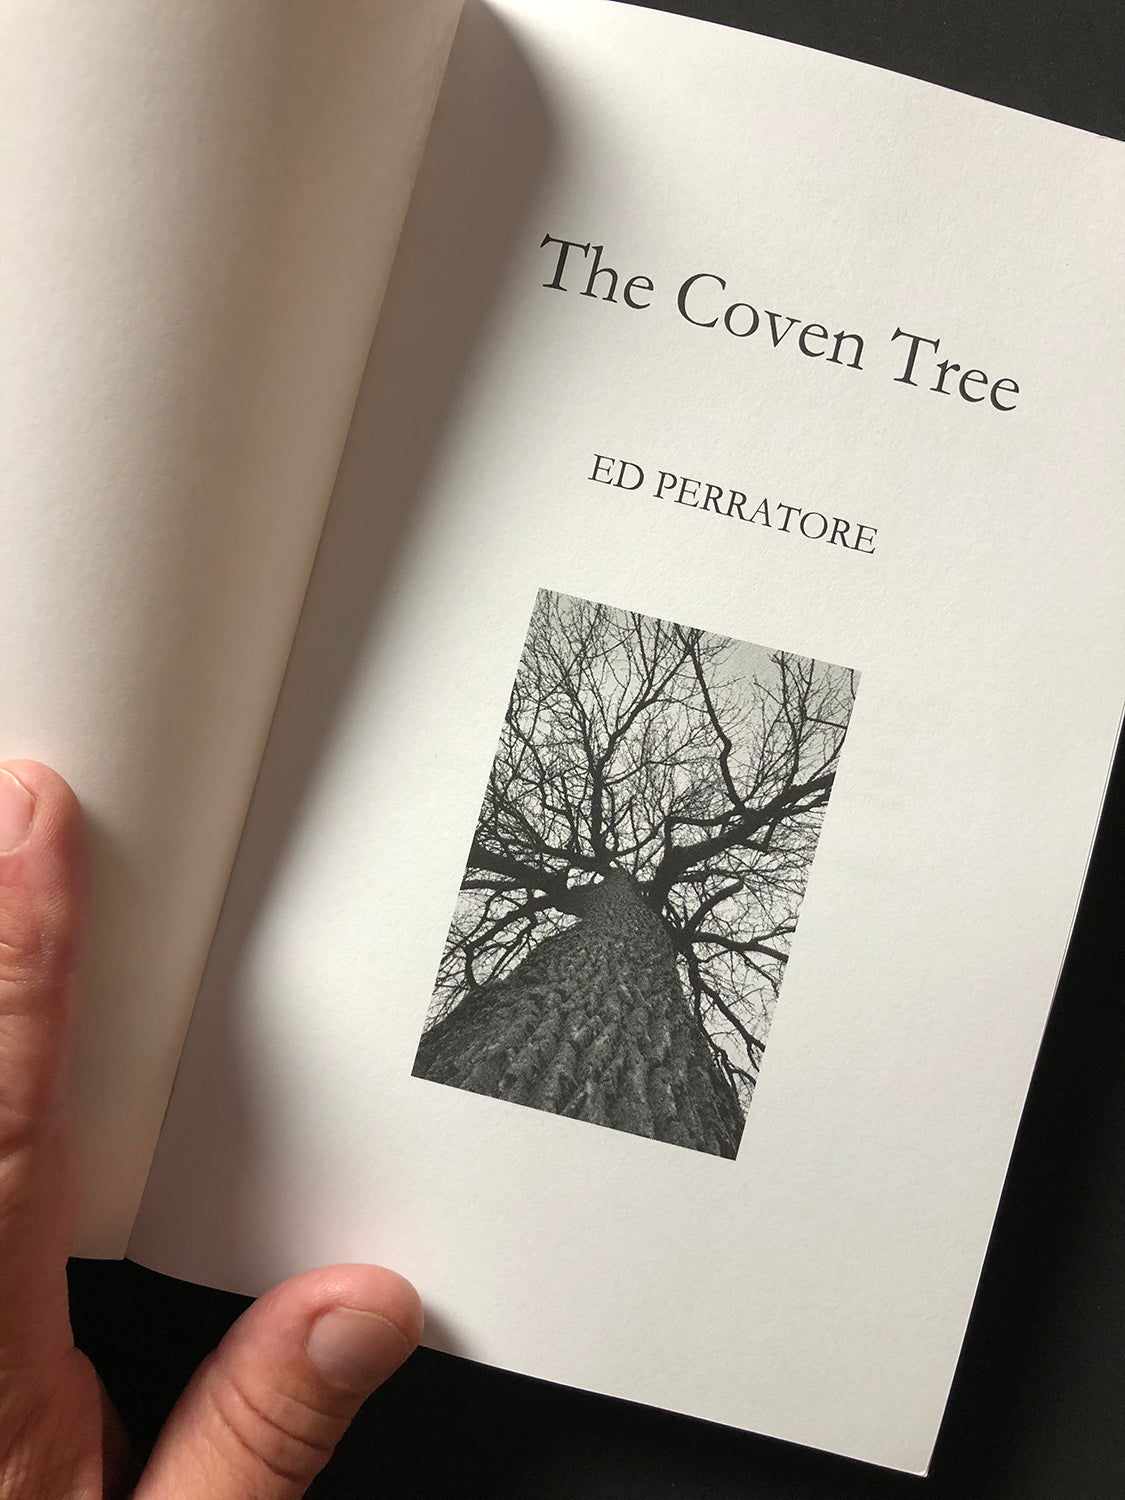 Keith Dotson's photograph of a giant cottonwood tree in winter as seen on the cover page of The Coven Tree written by Ed Perratore.